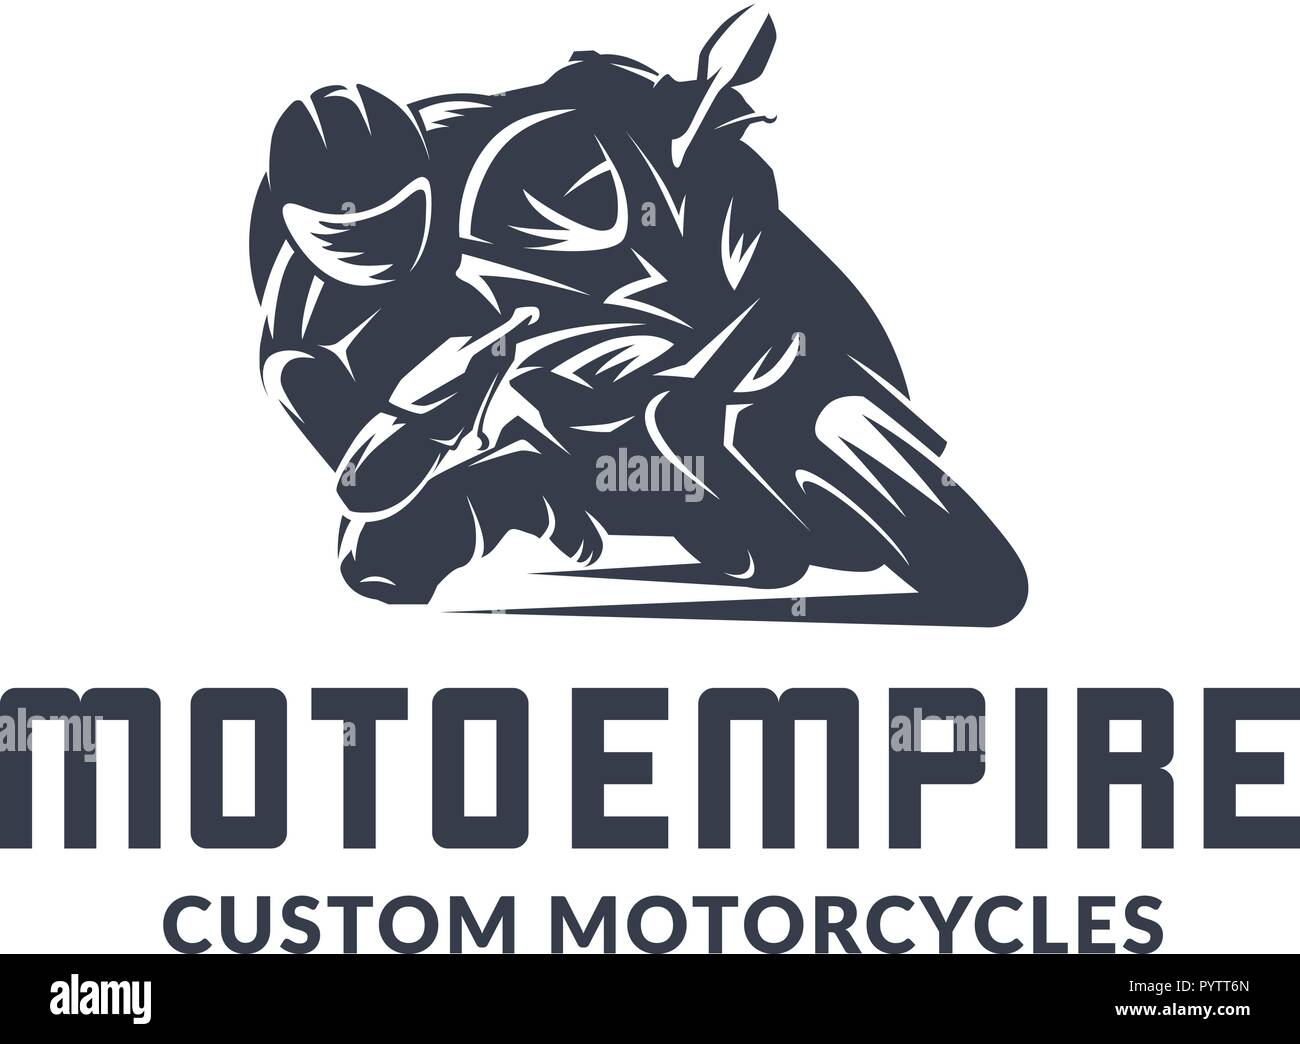 Racing motorcycle logo on white background. Superbike vector monochrome ...